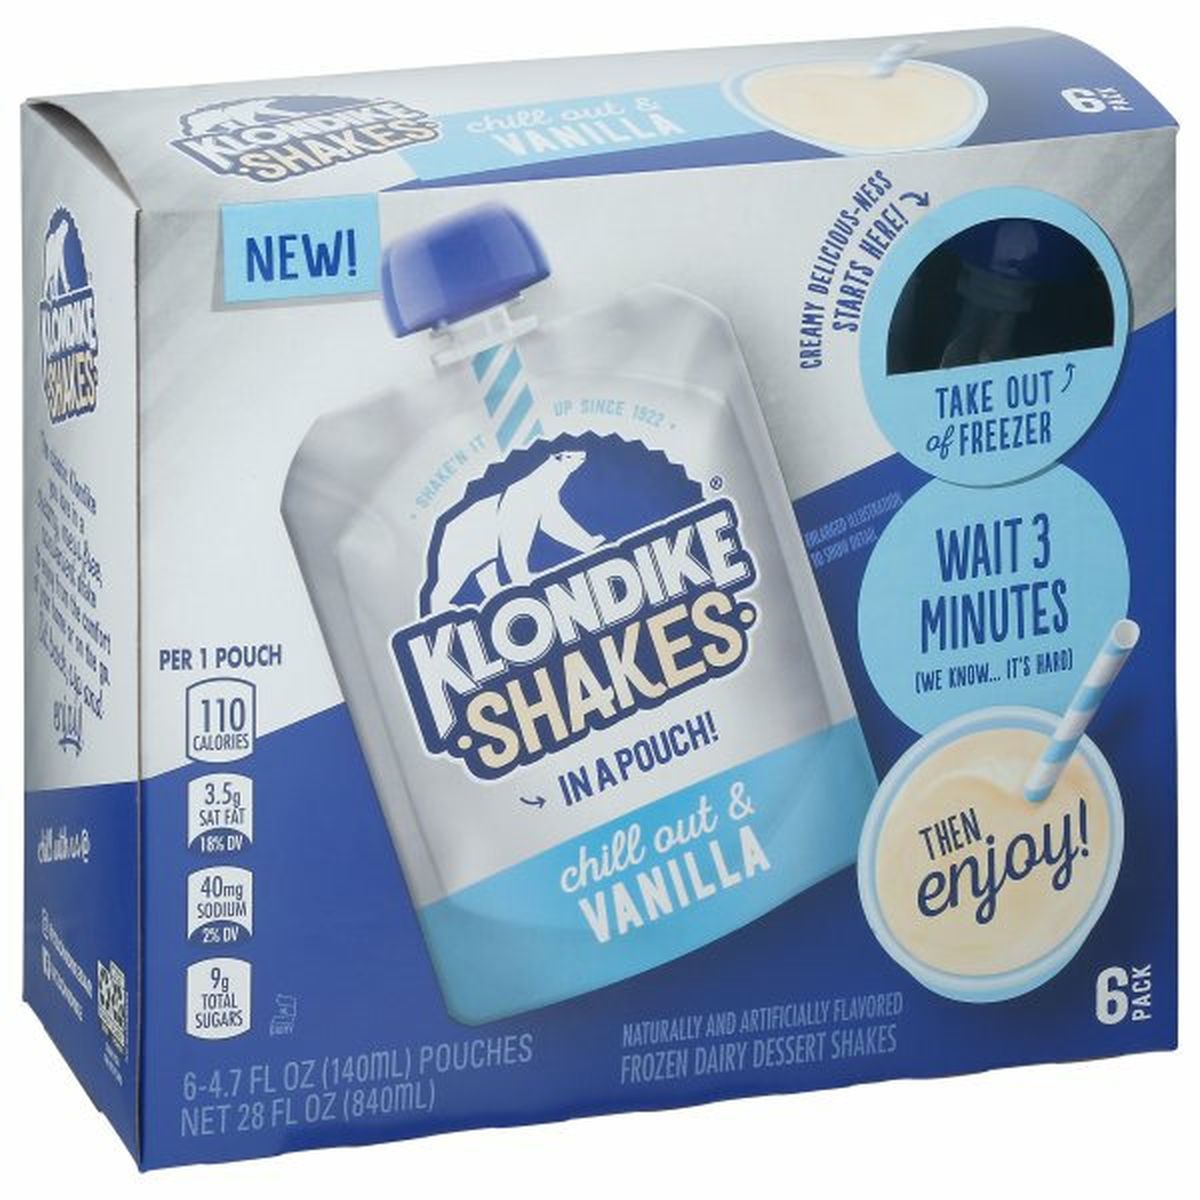 Calories in Klondike Shakes Frozen Dairy Dessert Shakes, Chill Out & Vanilla, 6 Pack